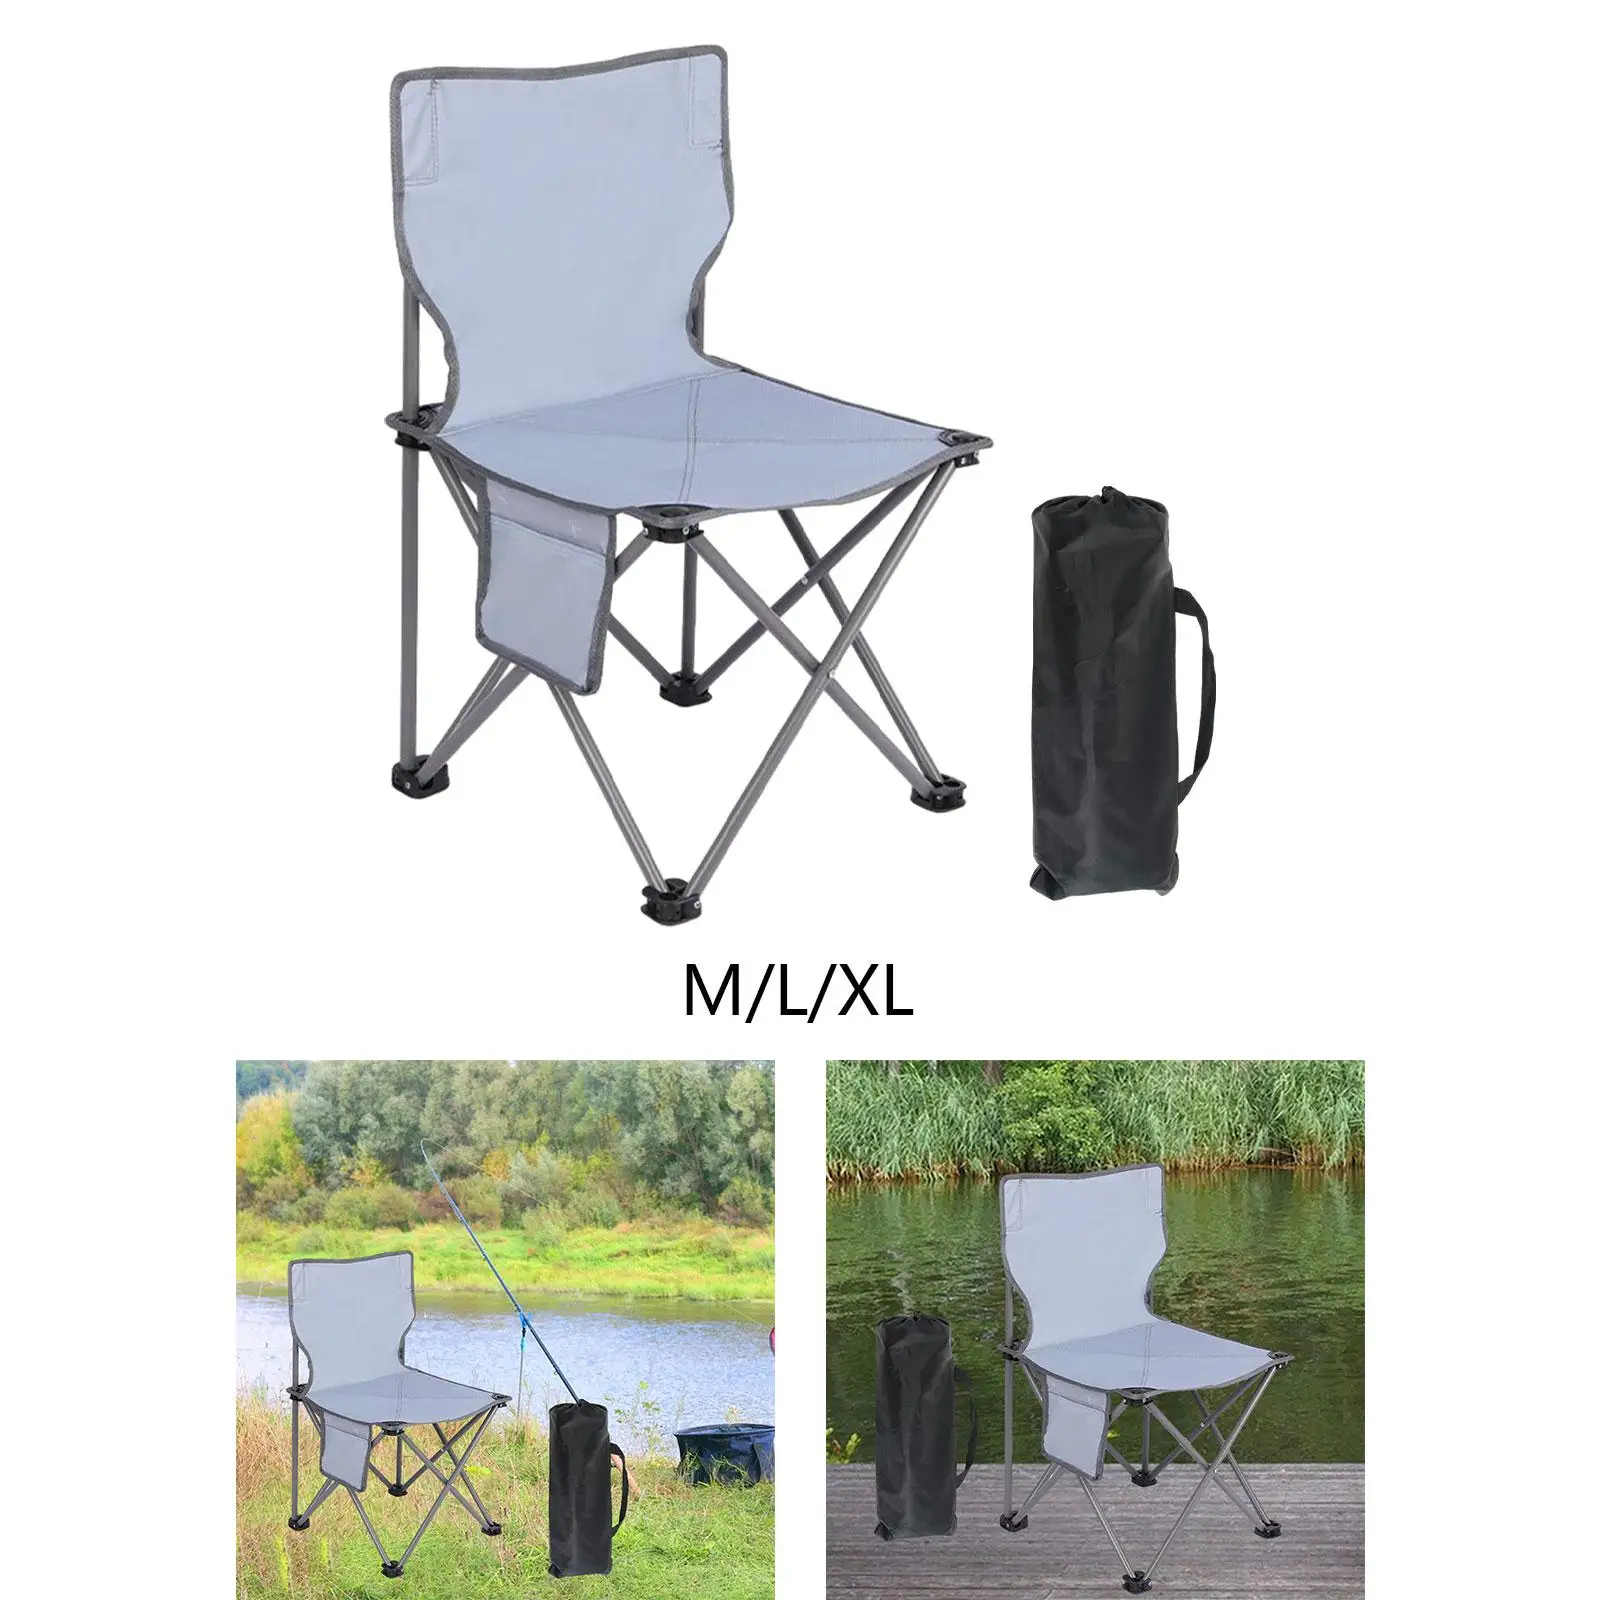 Portable Camping Chair with Side Pocket Outdoor Furniture High Back Folding Chair for Outside for Park Beach Picnic Patio Lawn